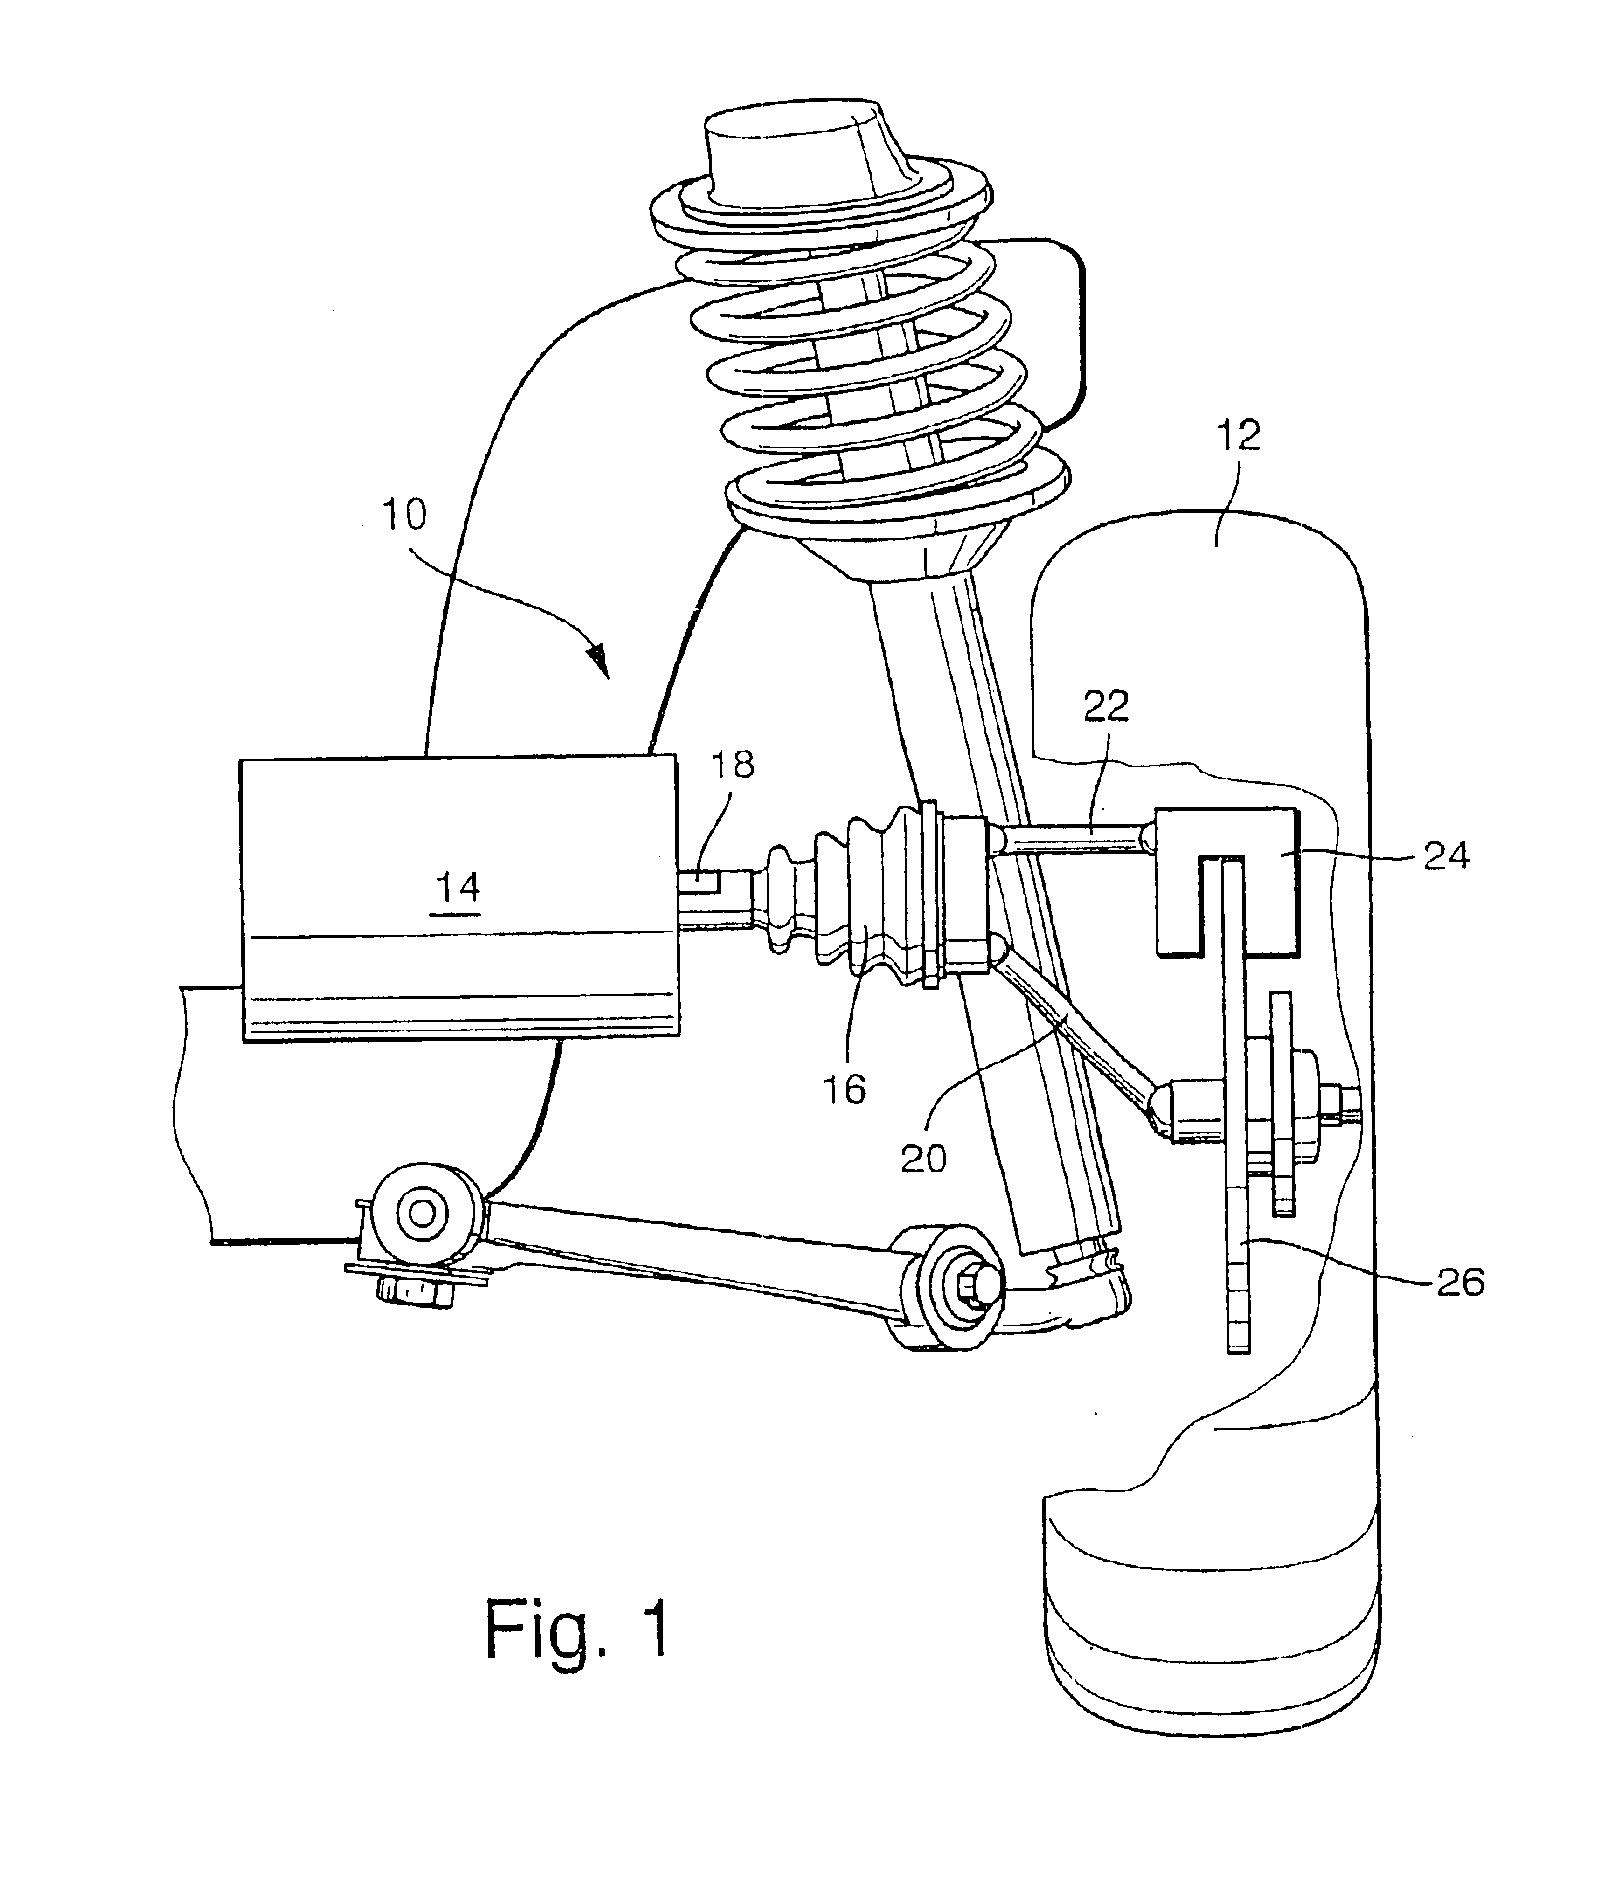 Electrical drive for a vehicle